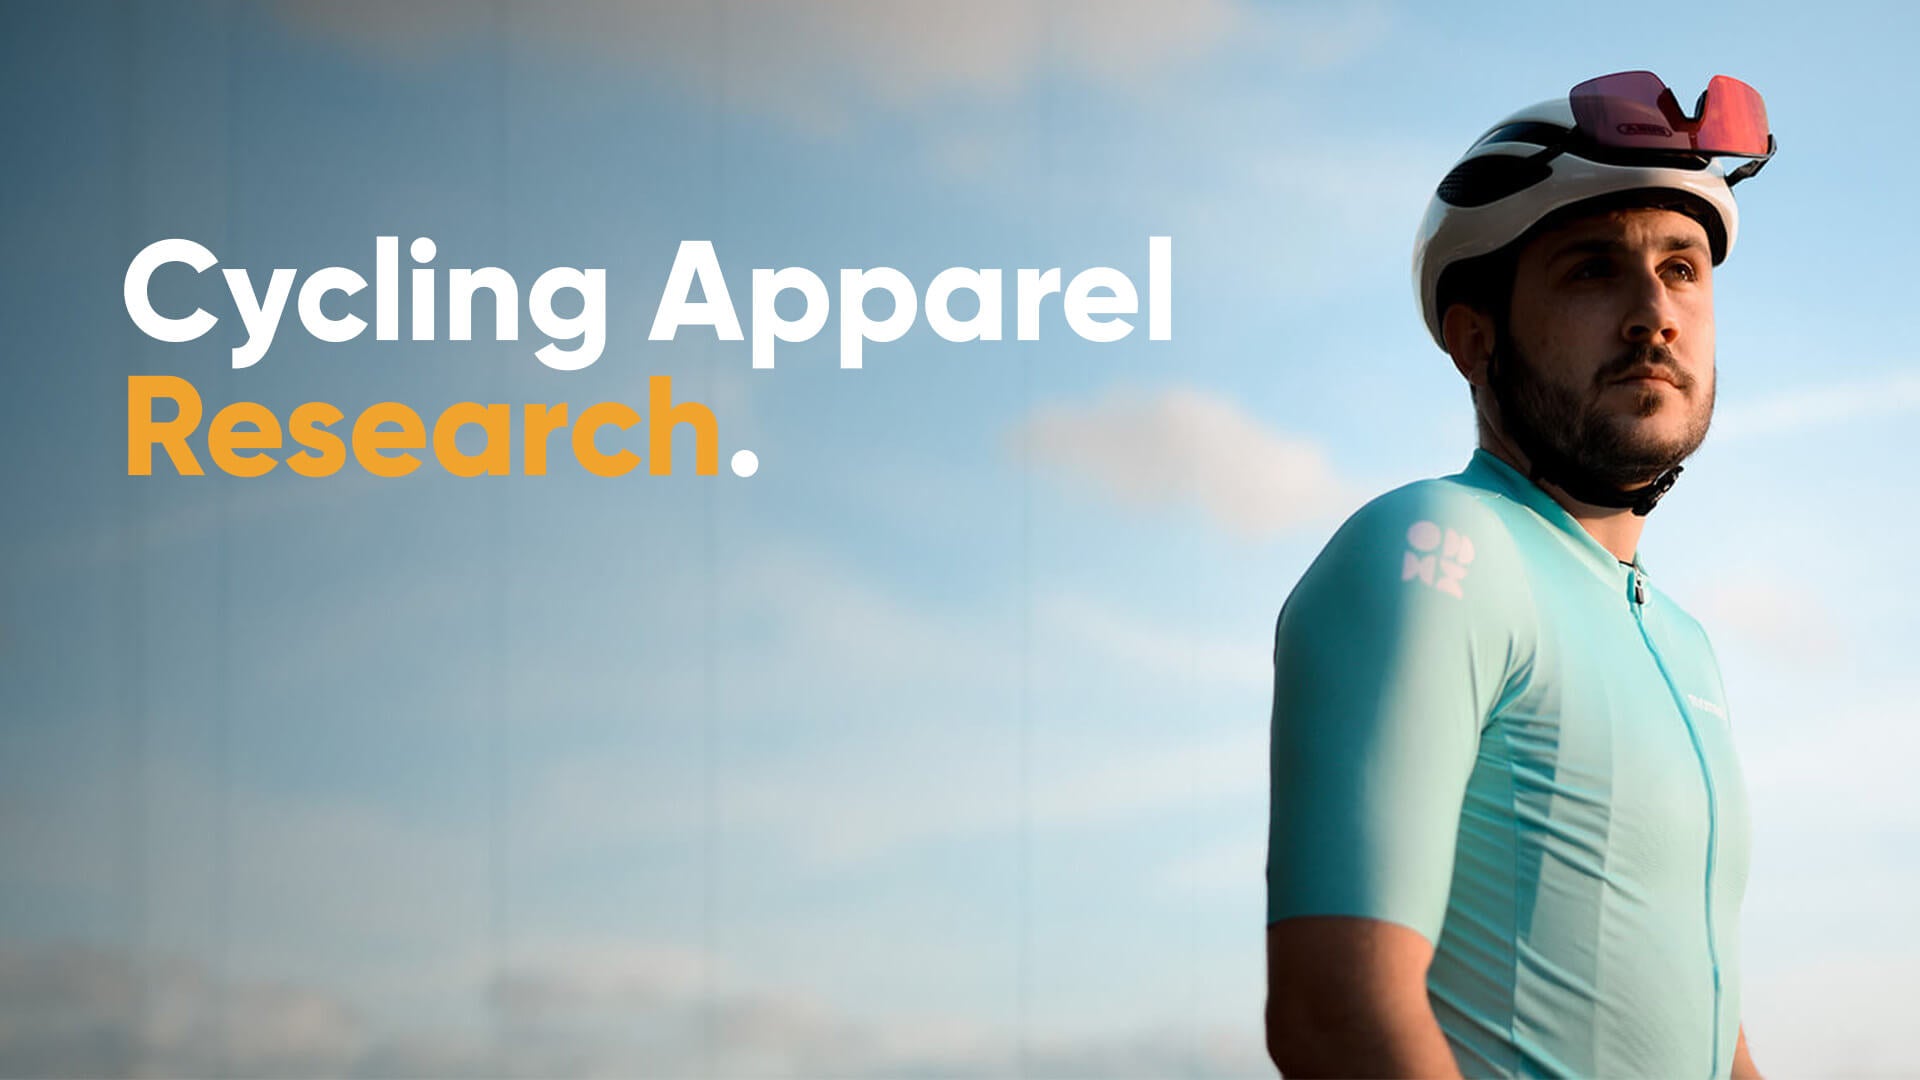 Research: We discover your cycle apparel wants and needs